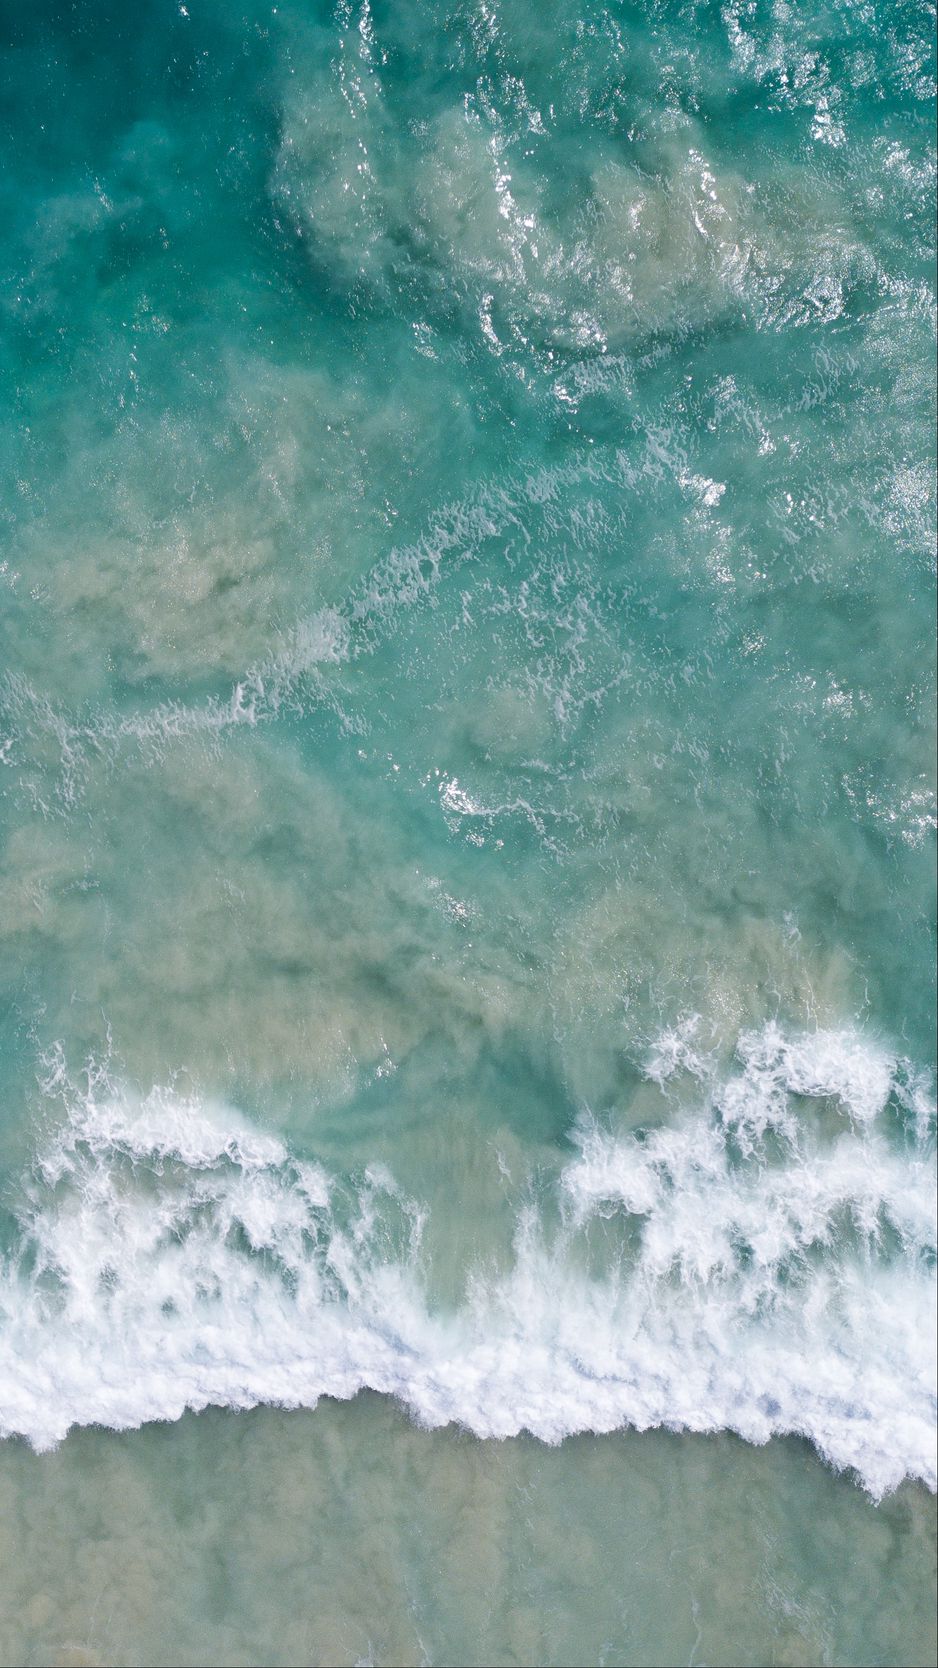 Download wallpaper 938x1668 ocean, waves, water, aerial view iphone  8/7/6s/6 for parallax hd background